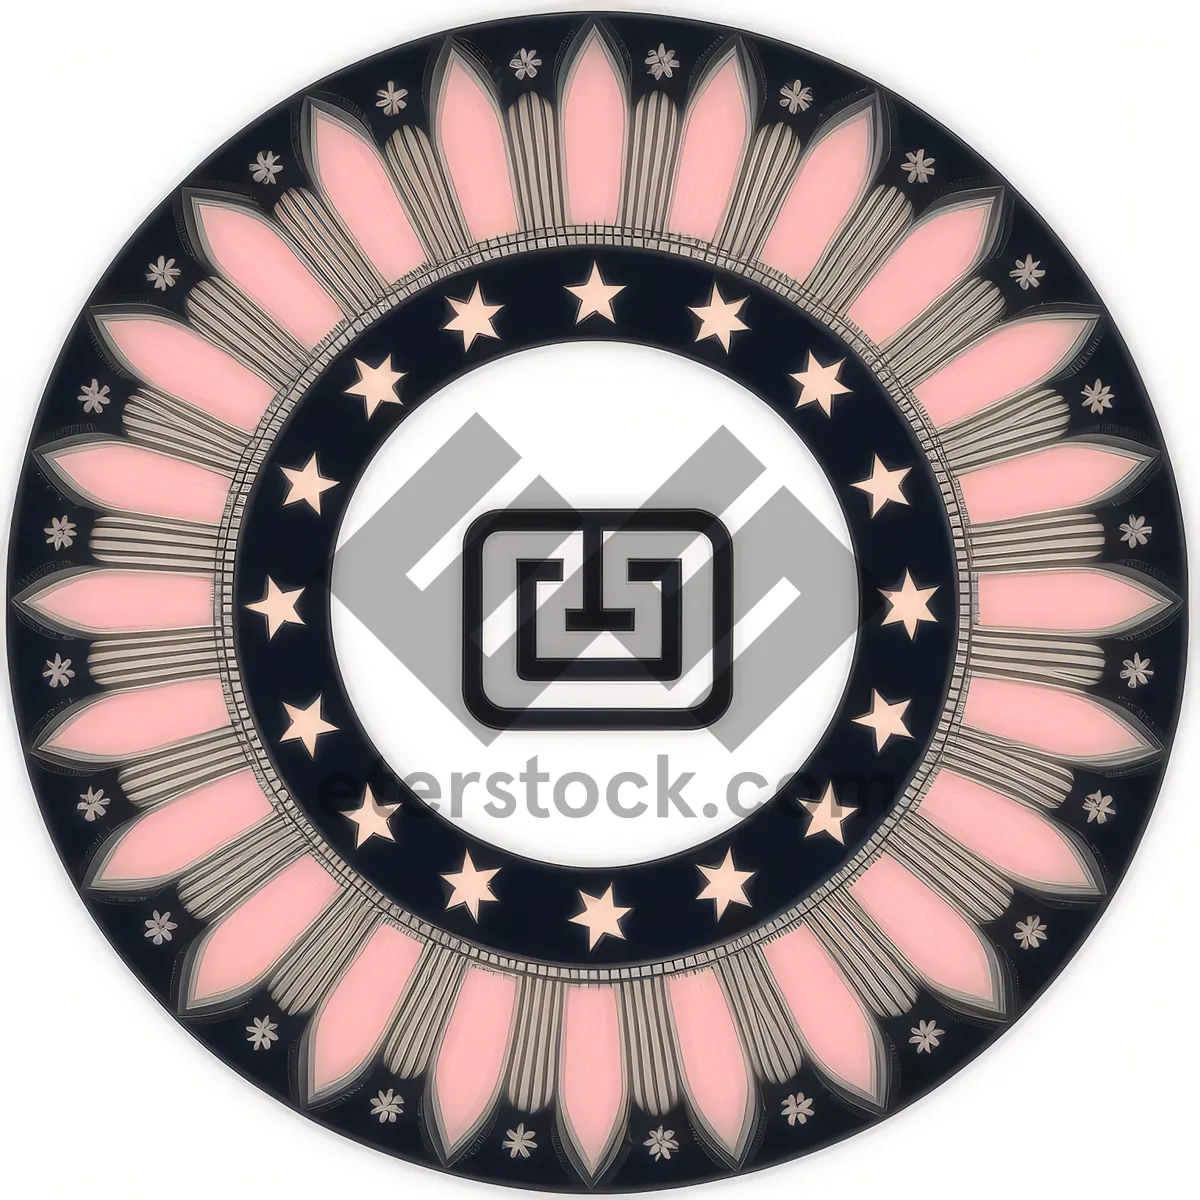 Picture of Shiny Metallic Round Wall Clock Icon